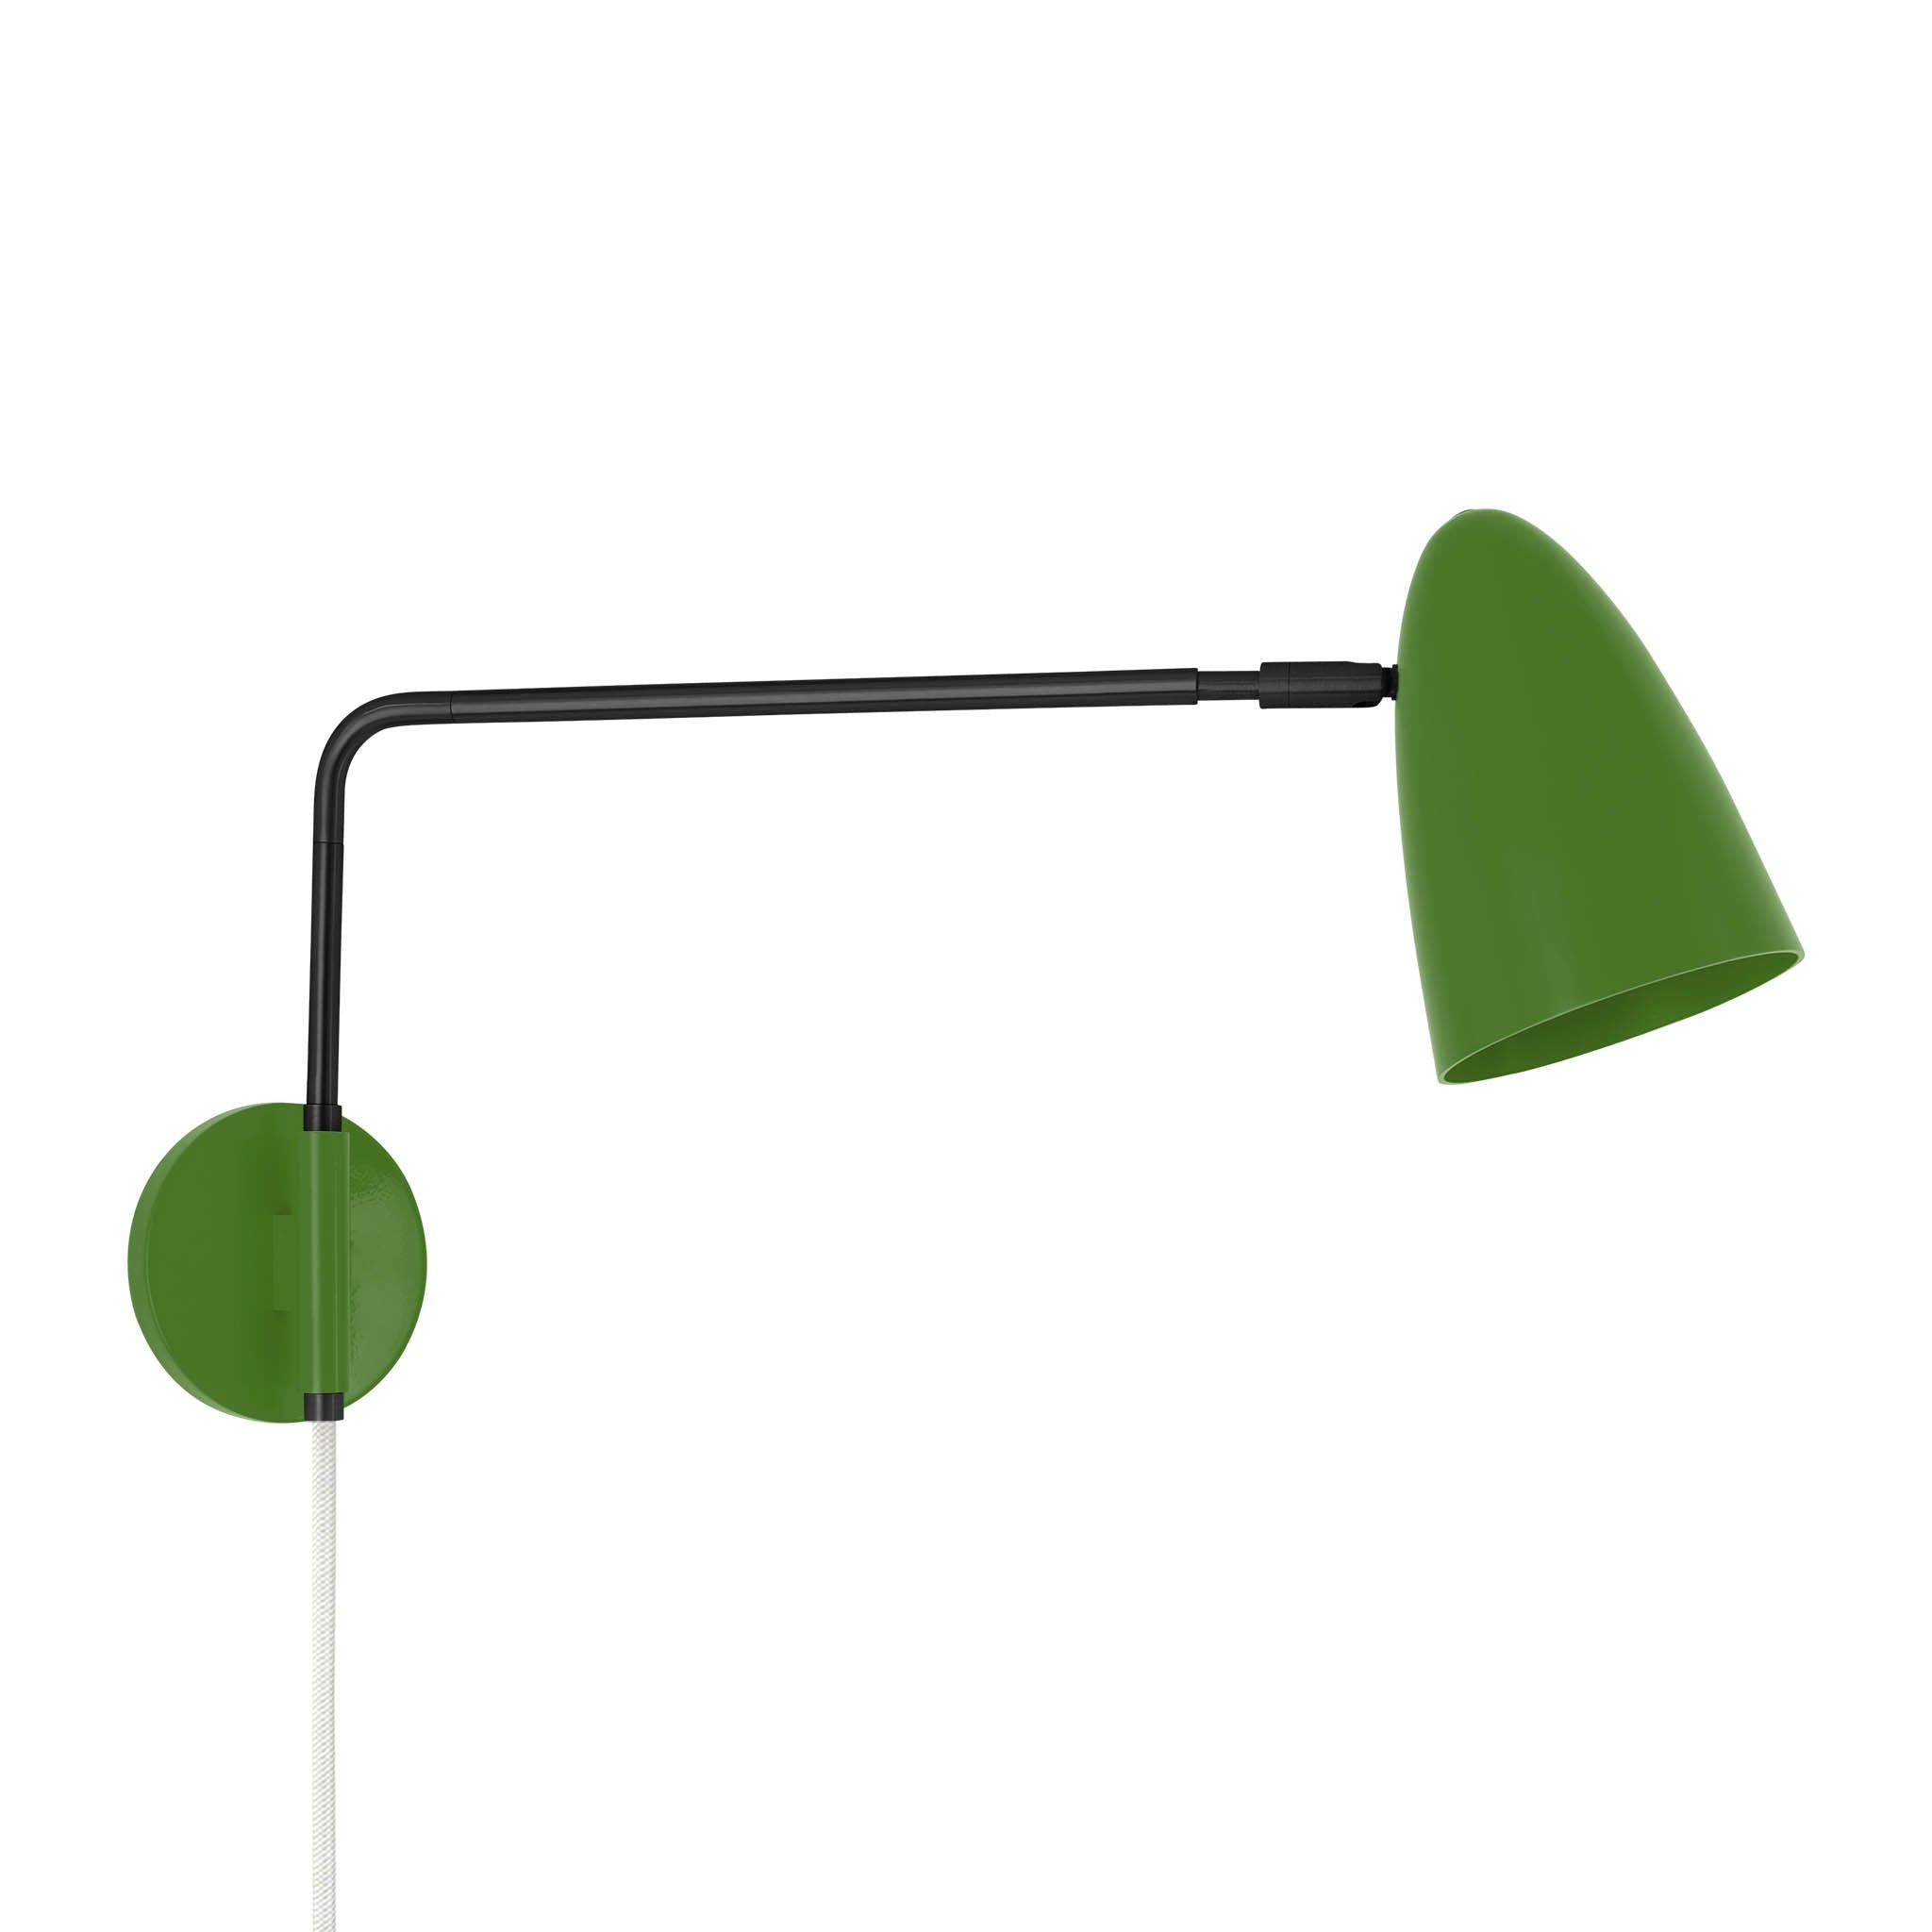 Black and python green color Boom Swing Arm plug-in sconce Dutton Brown lighting